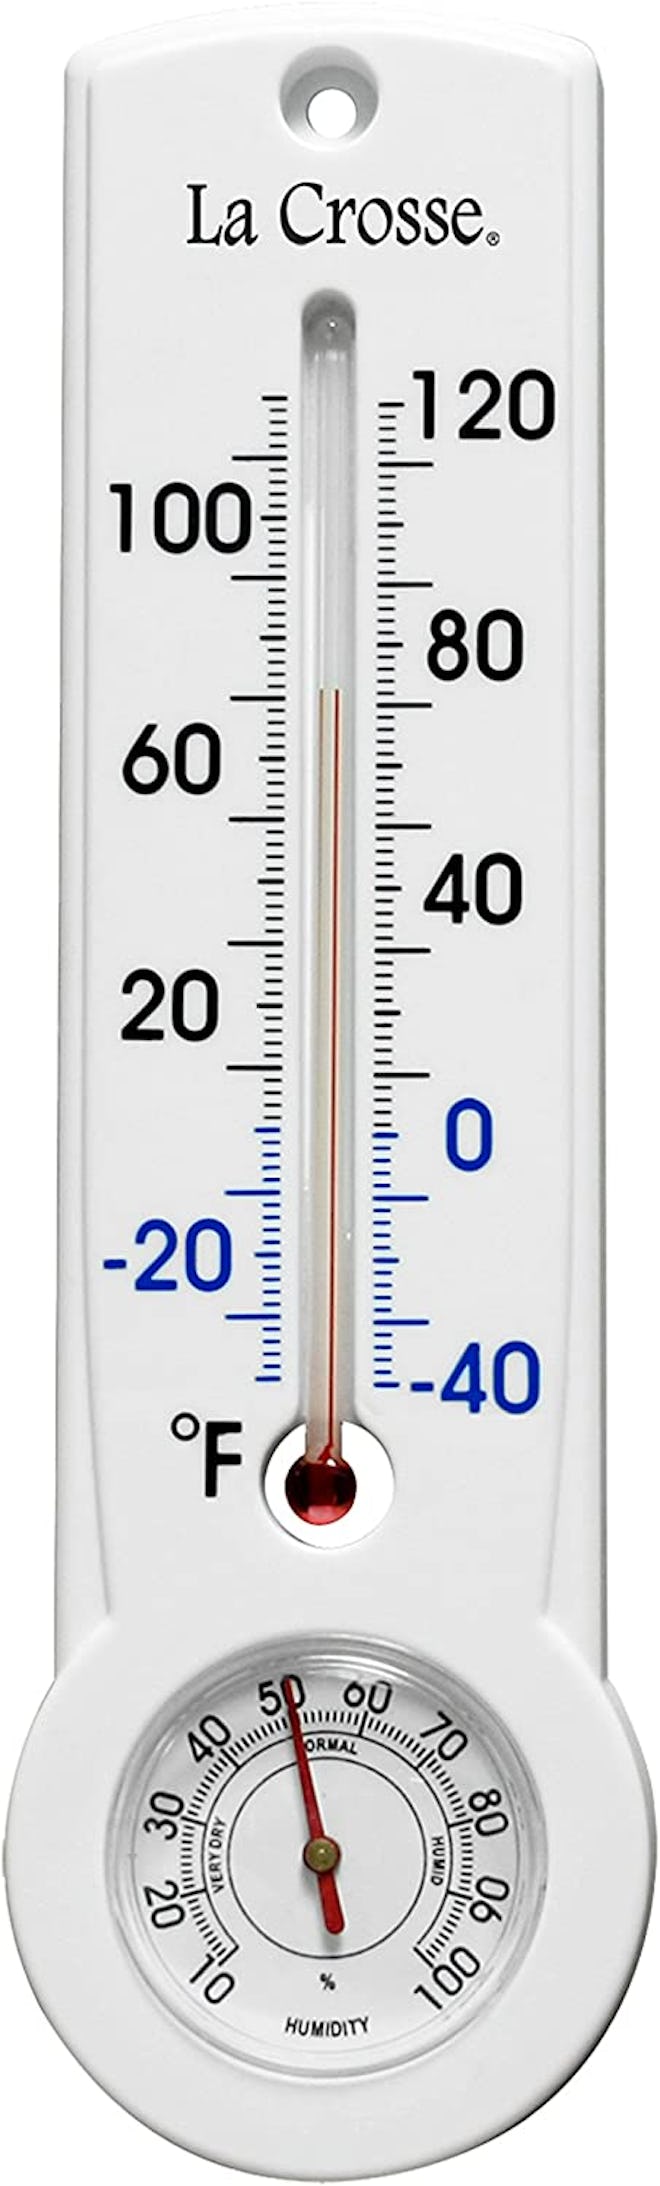 LaCrosse 9-Inch Traditional Thermometer